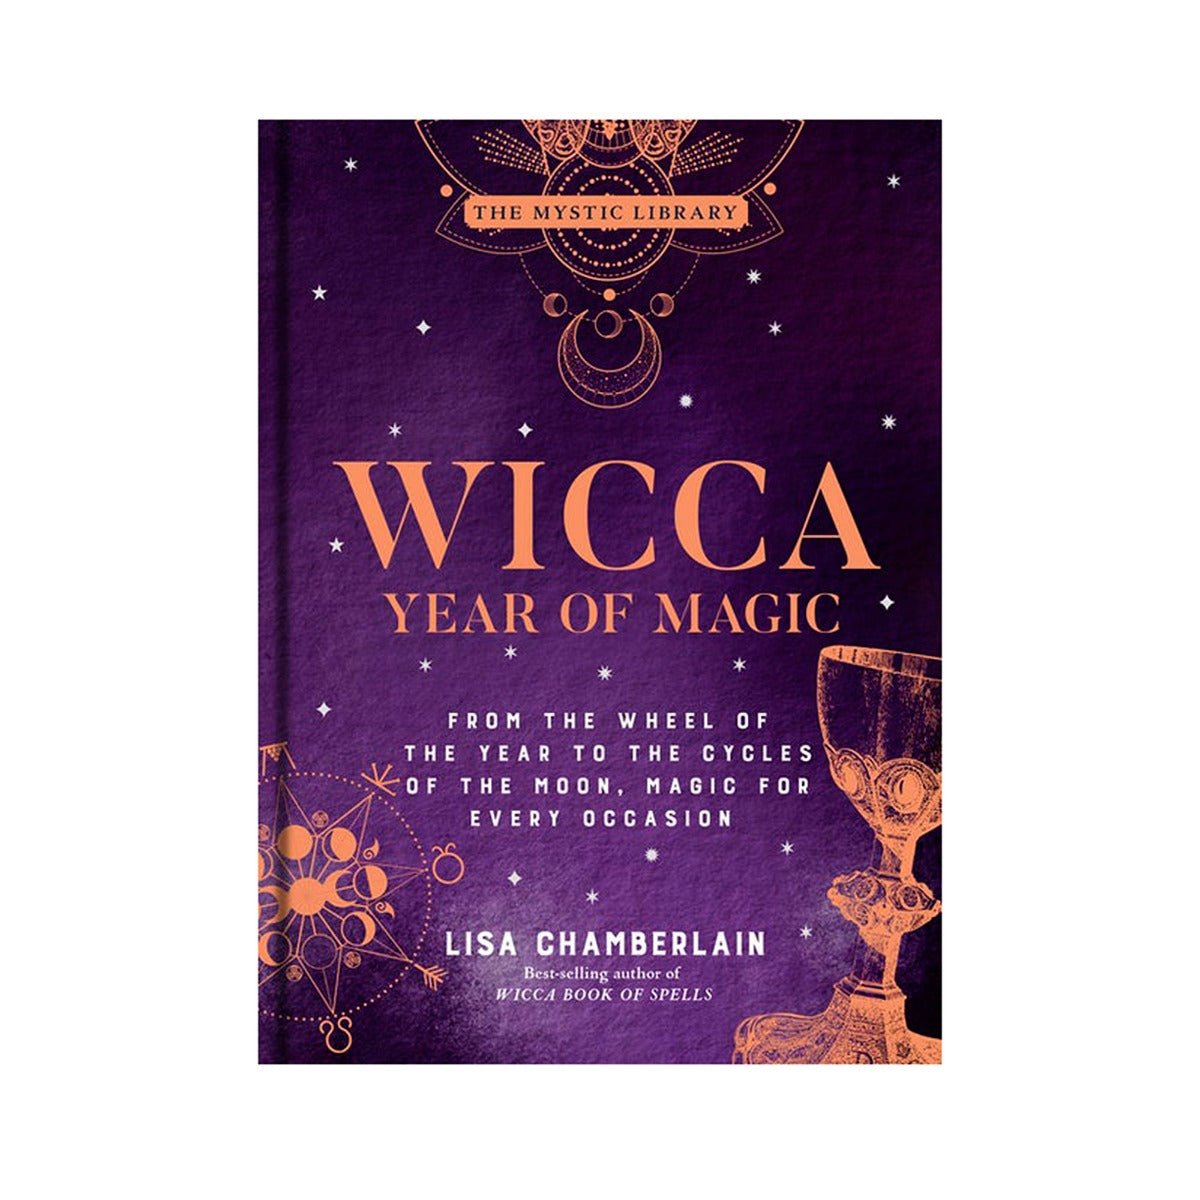 Wicca Year of Magic - 13 Moons